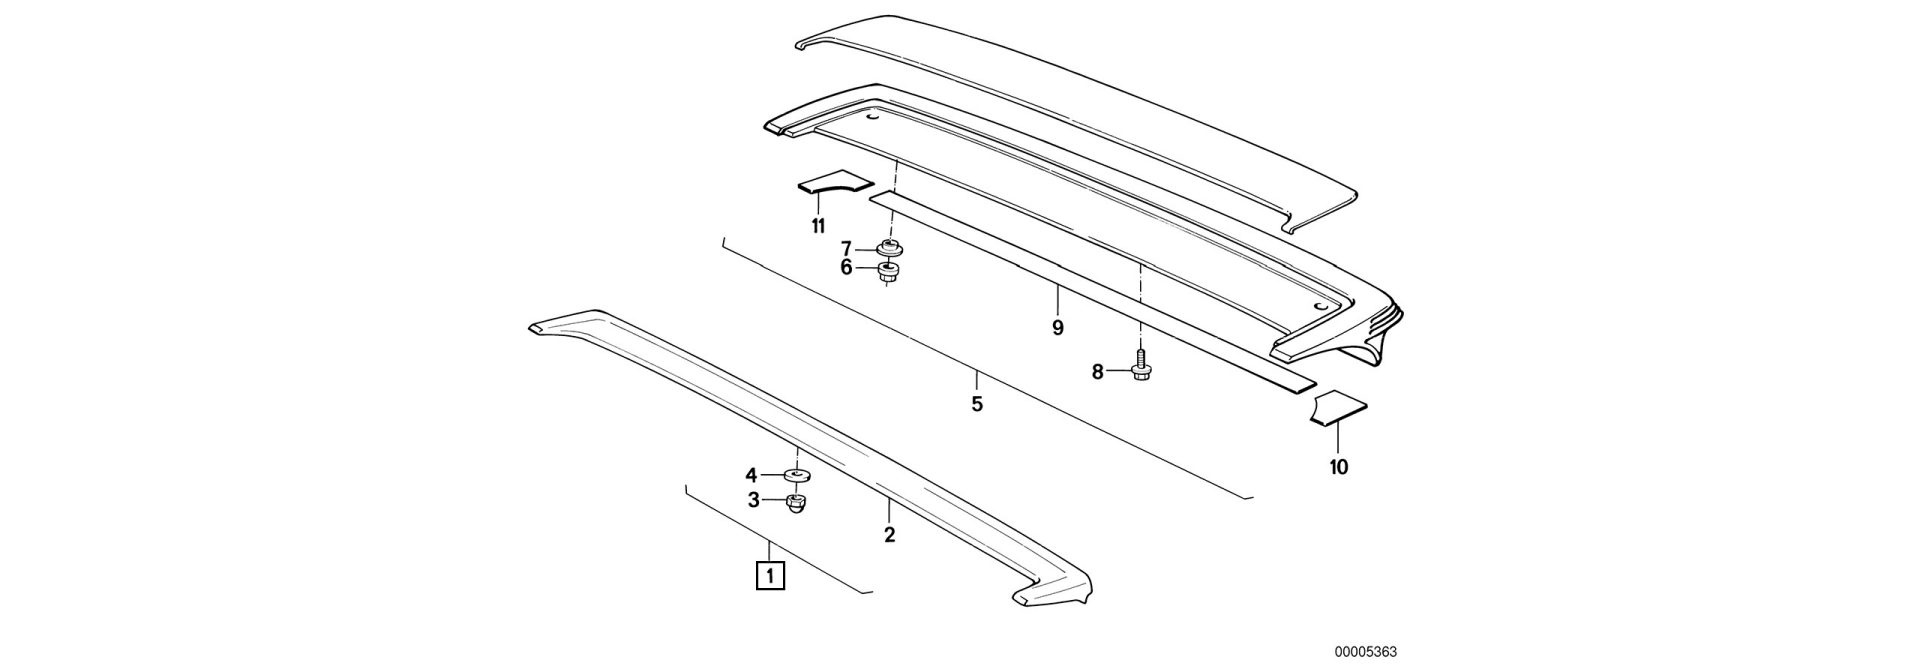 Rear spoiler prime coated exploded-view drawing